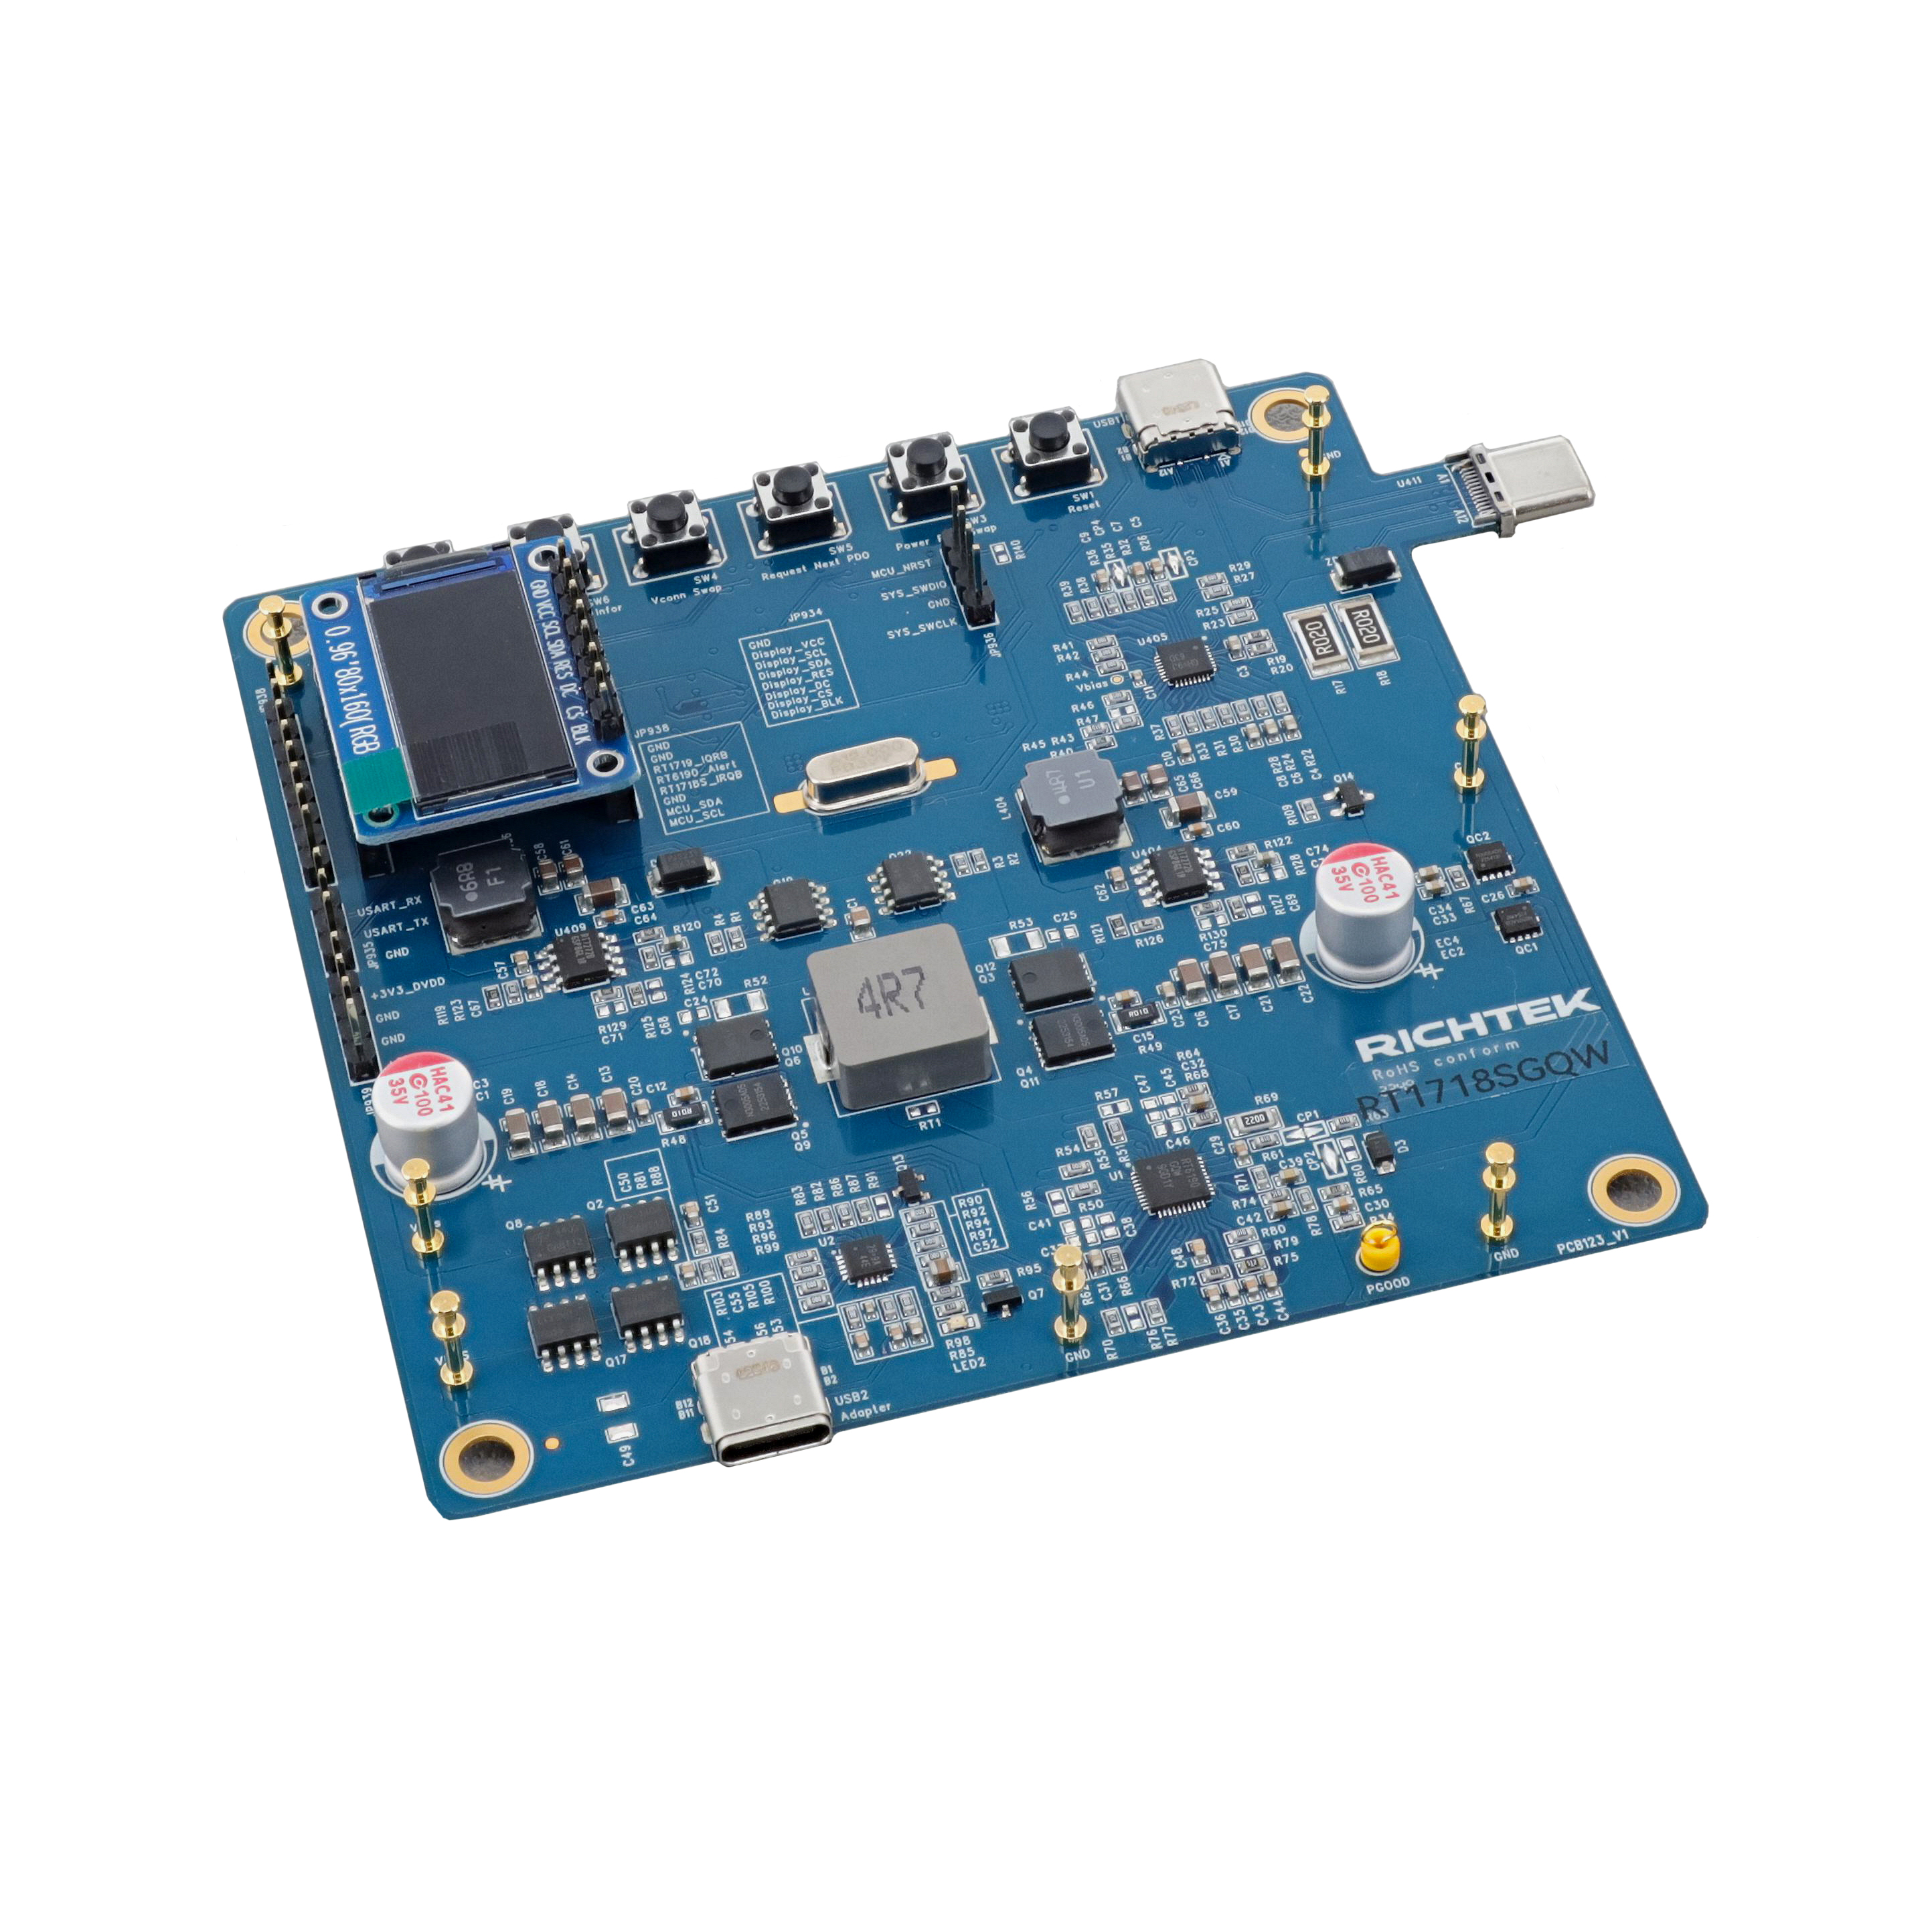 【EVB_RT1718SGQW】EVALUATION BOARD FOR RT1718SGQW